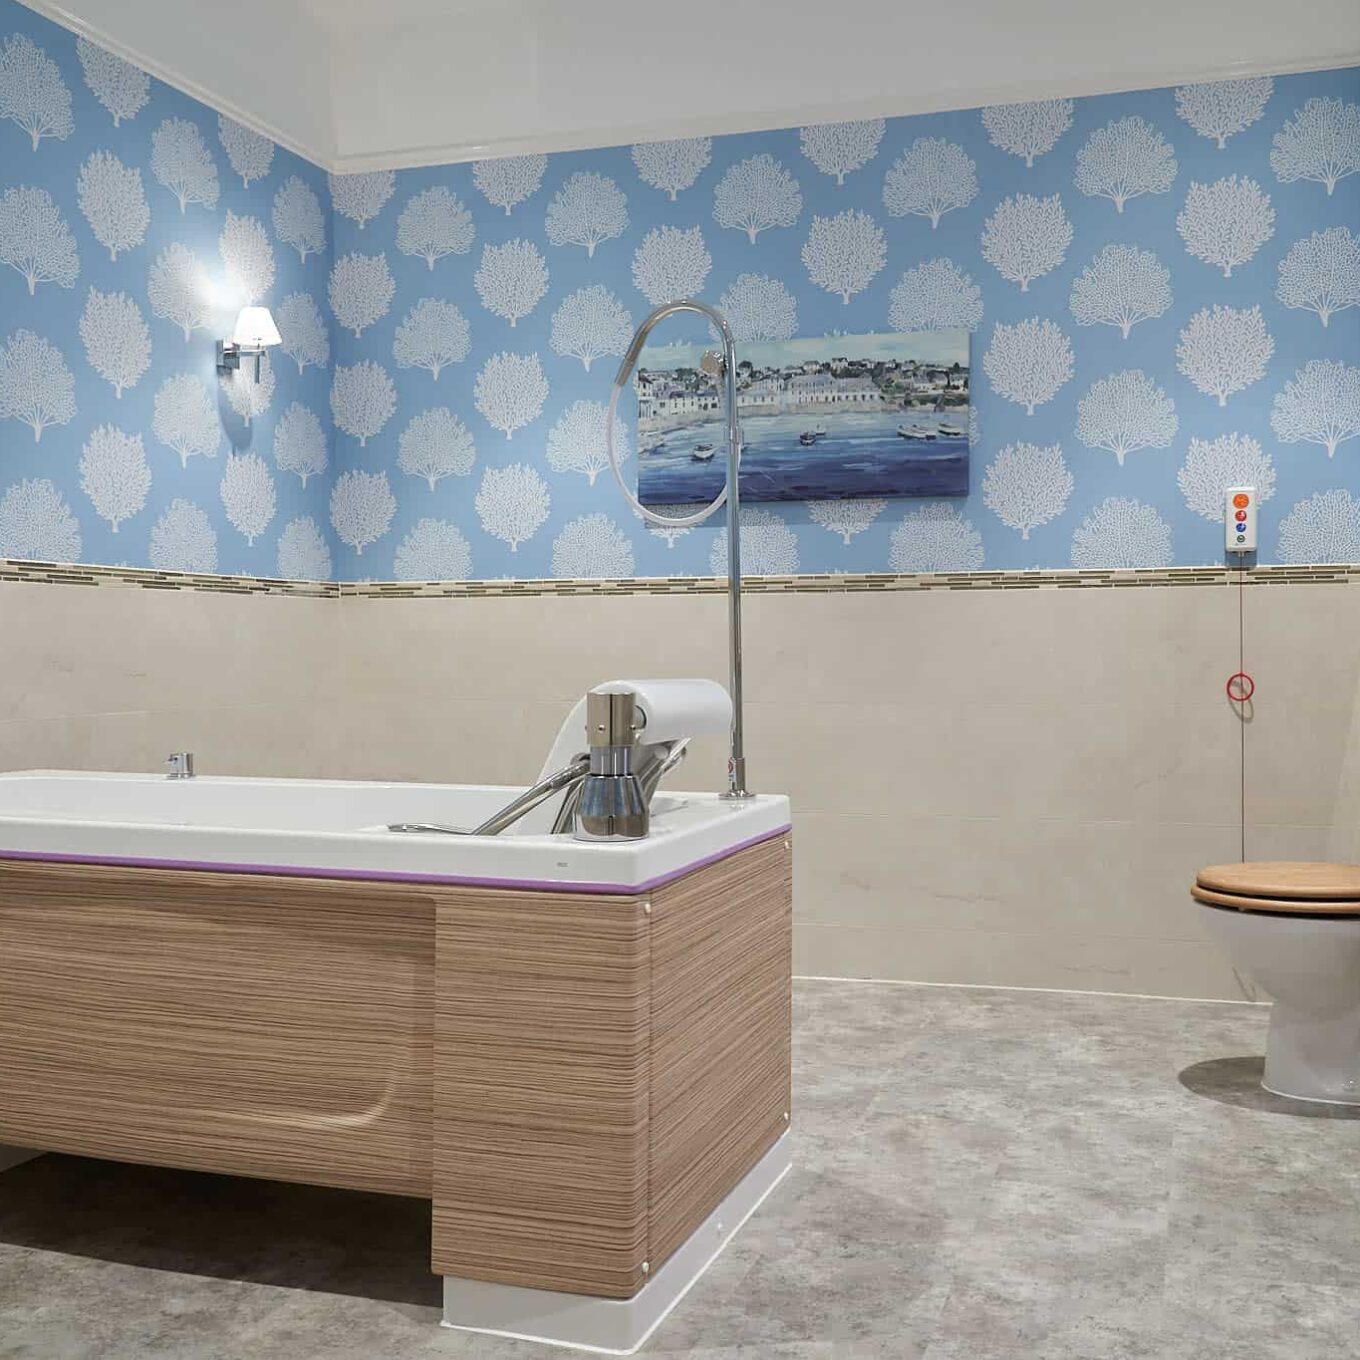 Bathroom at Lambwood Heights Care Home in Chigwell with toilet, bath and emergency cord